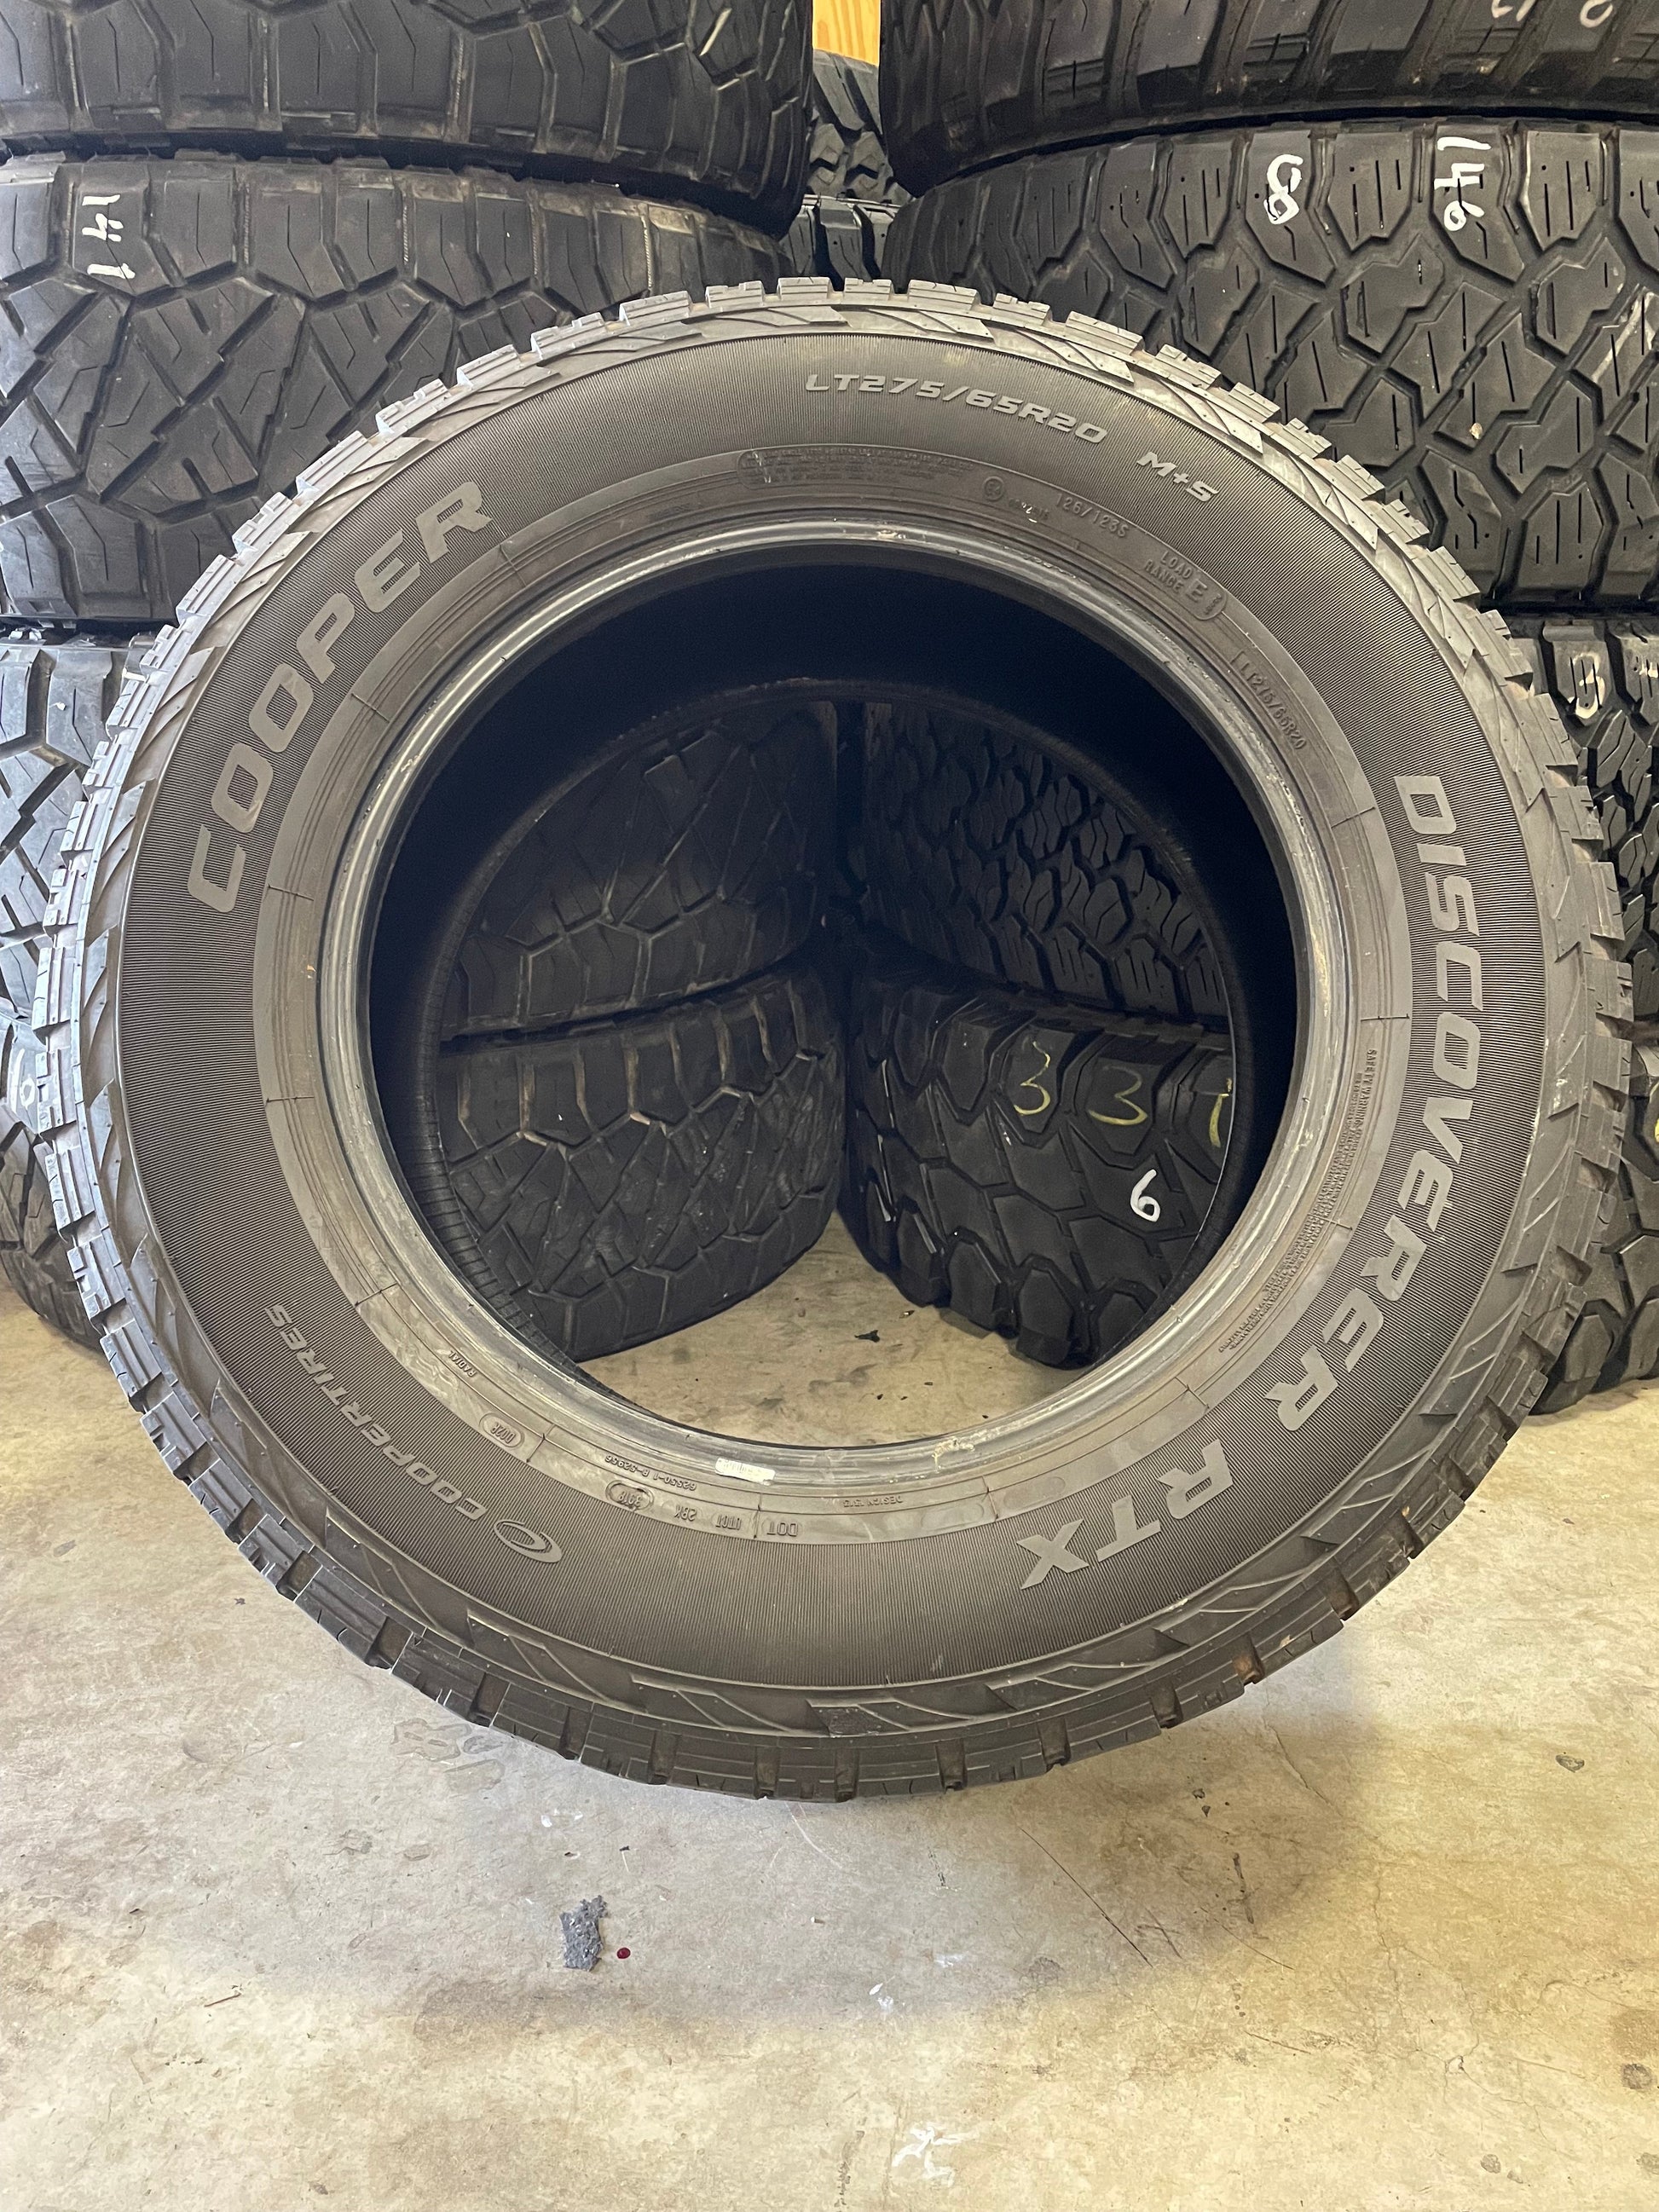 SINGLE 275/65R20 Cooper Discovery RTX 126/123S E - Used Tires